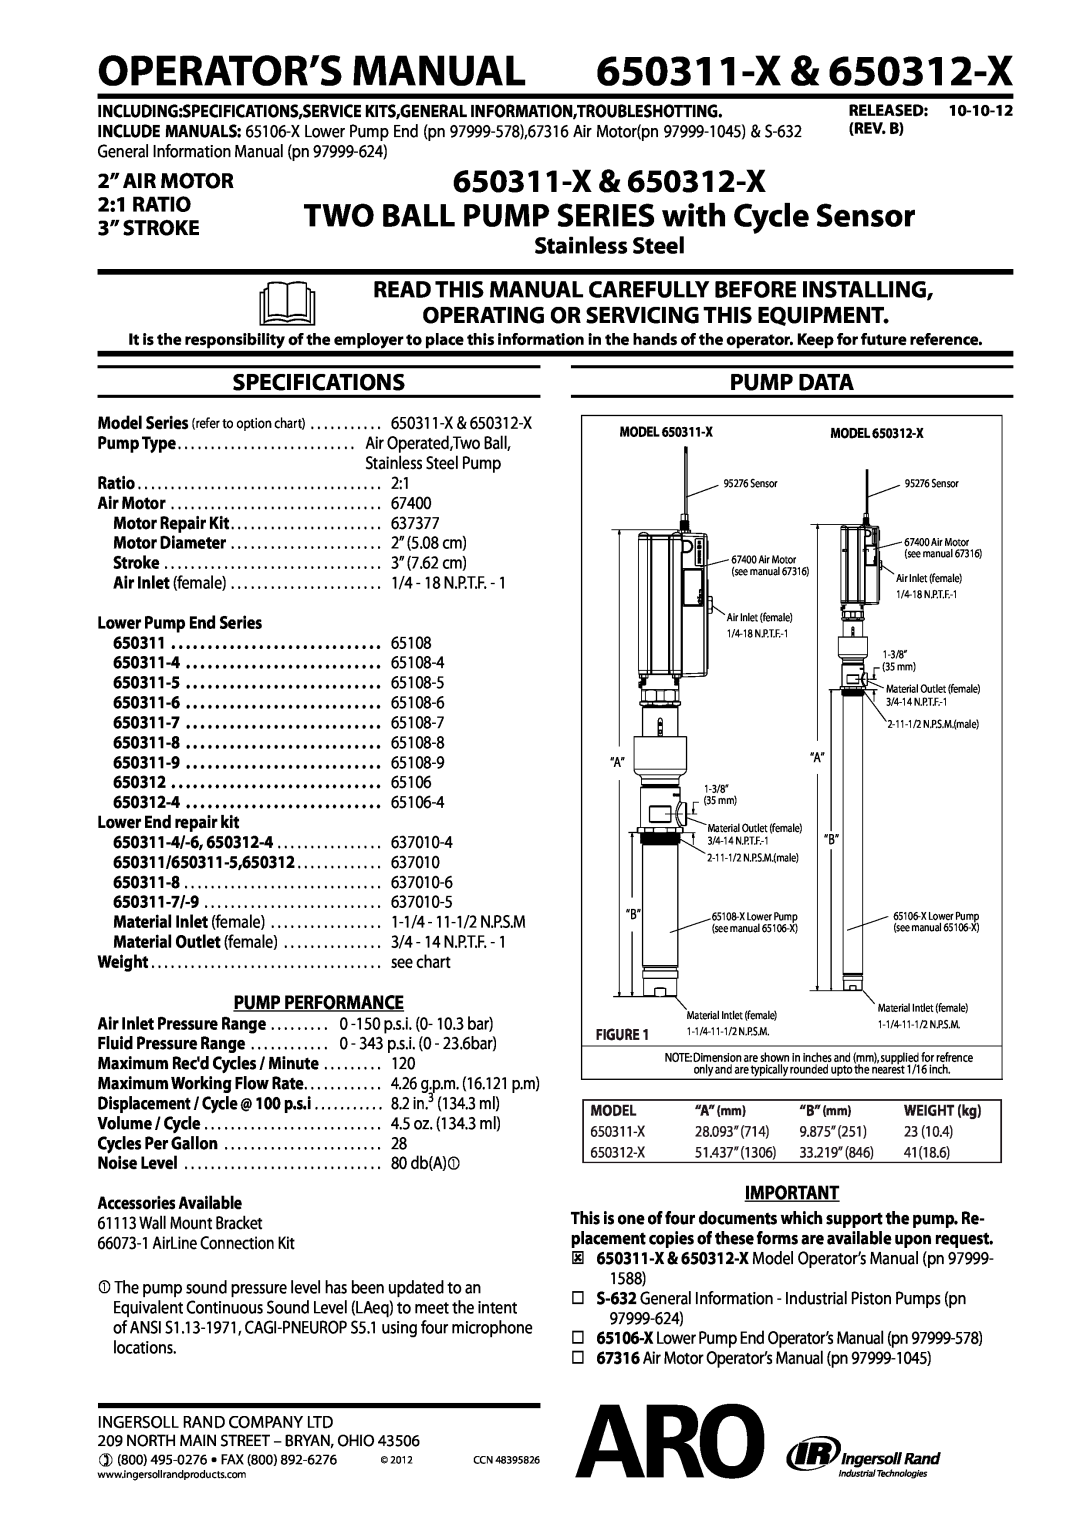 Ingersoll-Rand 650311-X & 650312-X specifications TWO BALL PUMP SERIES with Cycle Sensor, Specifications, Pump Data, Ratio 